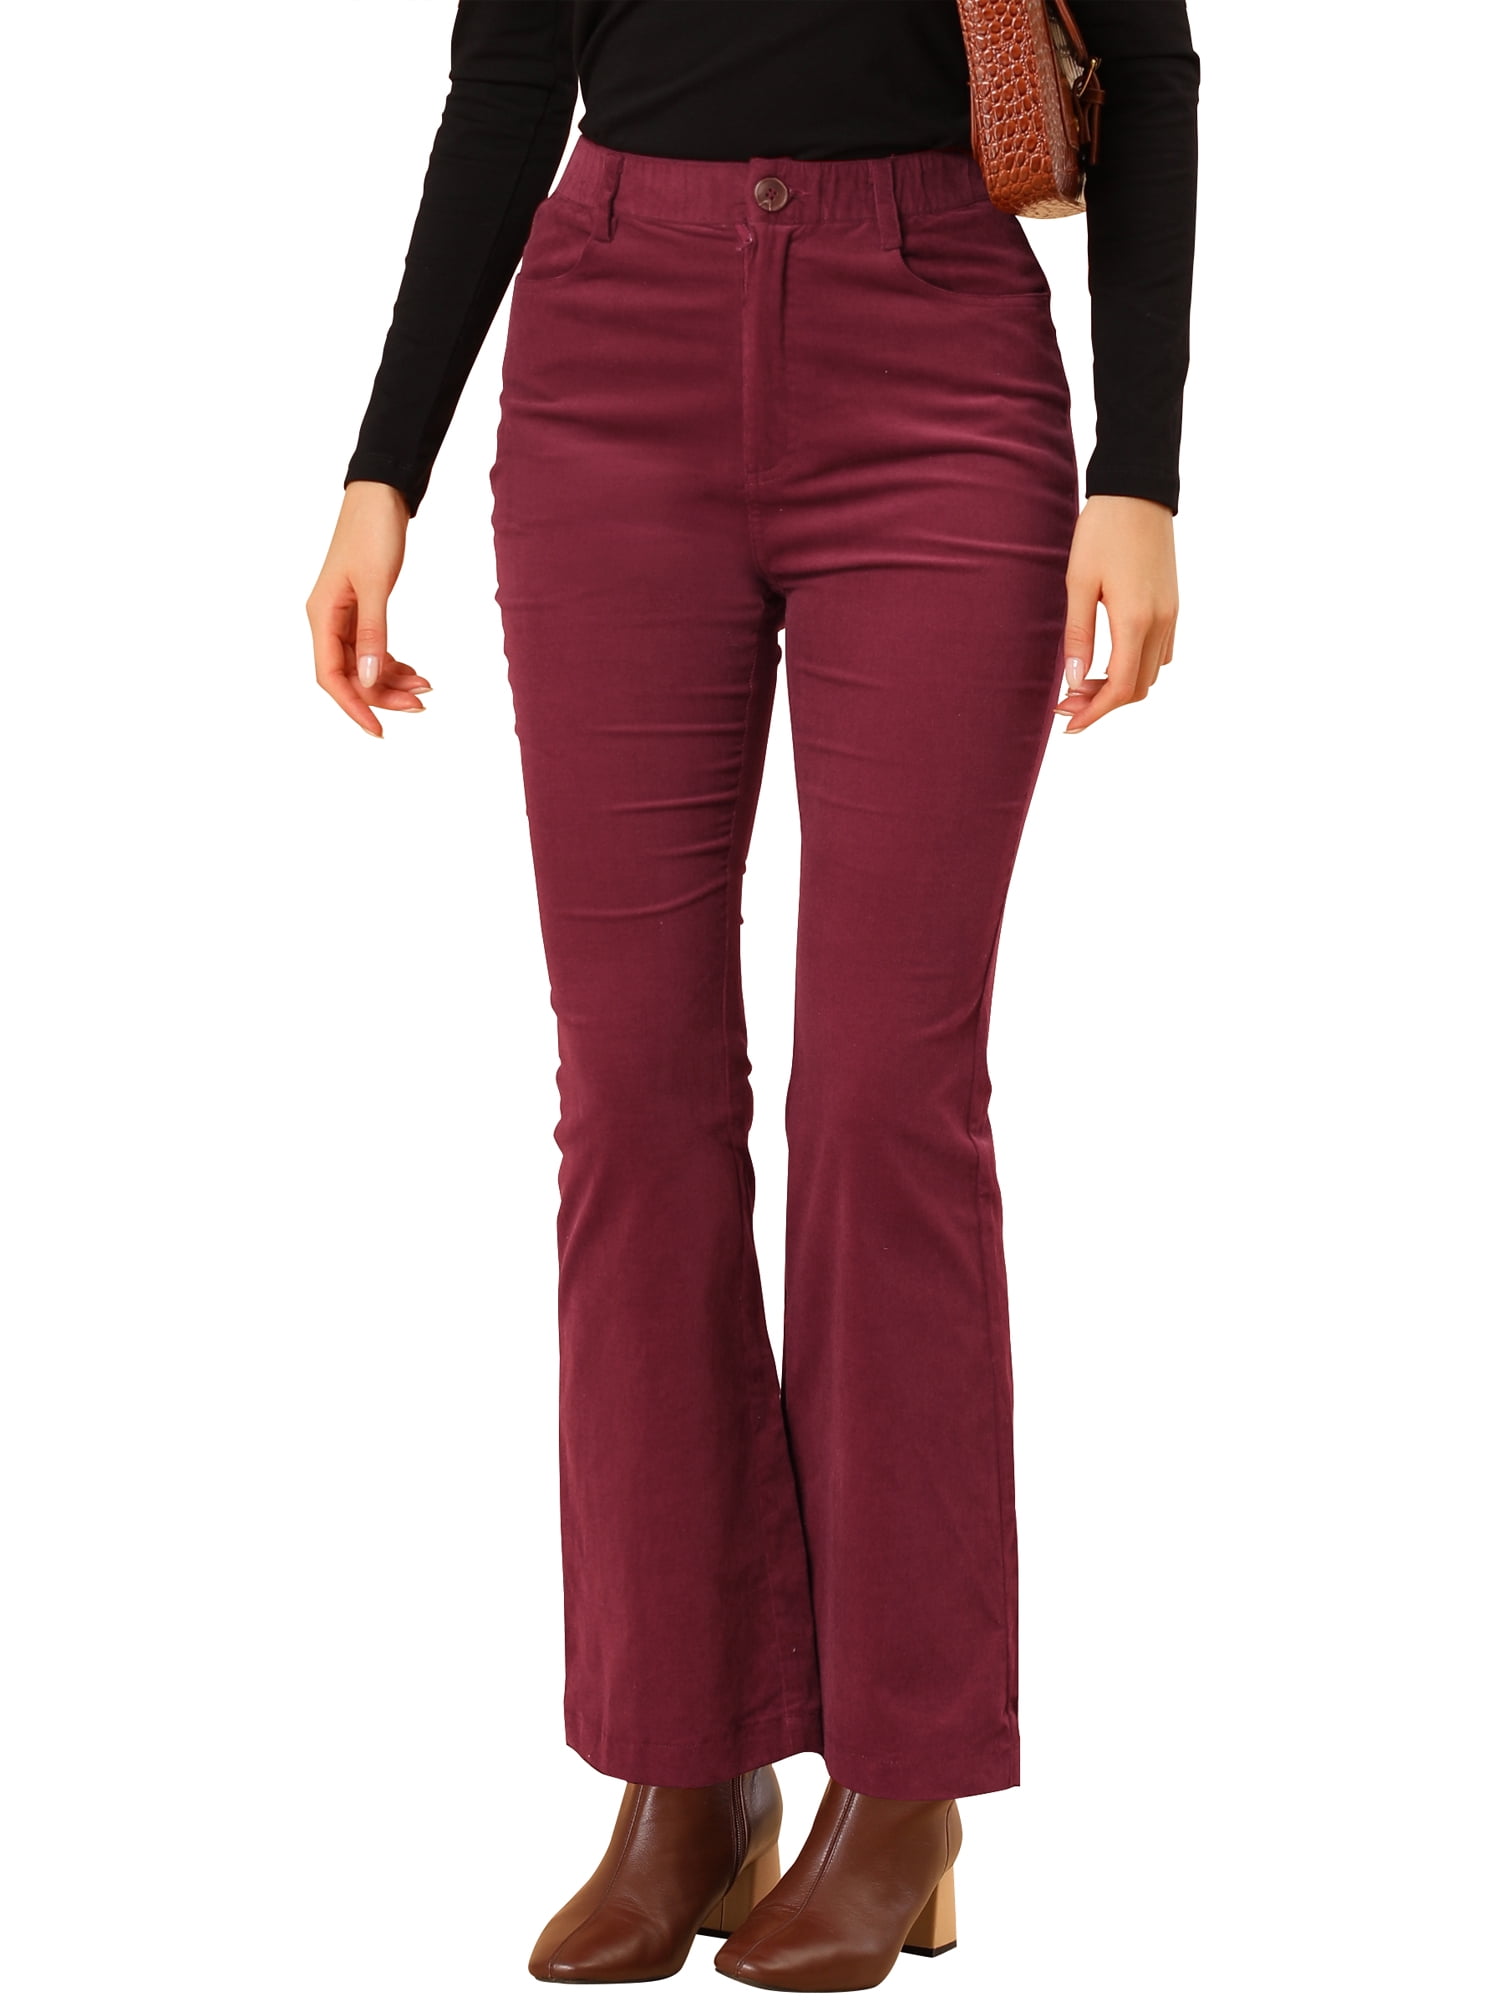 Lady High Waist Bell-Bottoms Casual Pants Vintage Women Corduroy Flared Trousers 